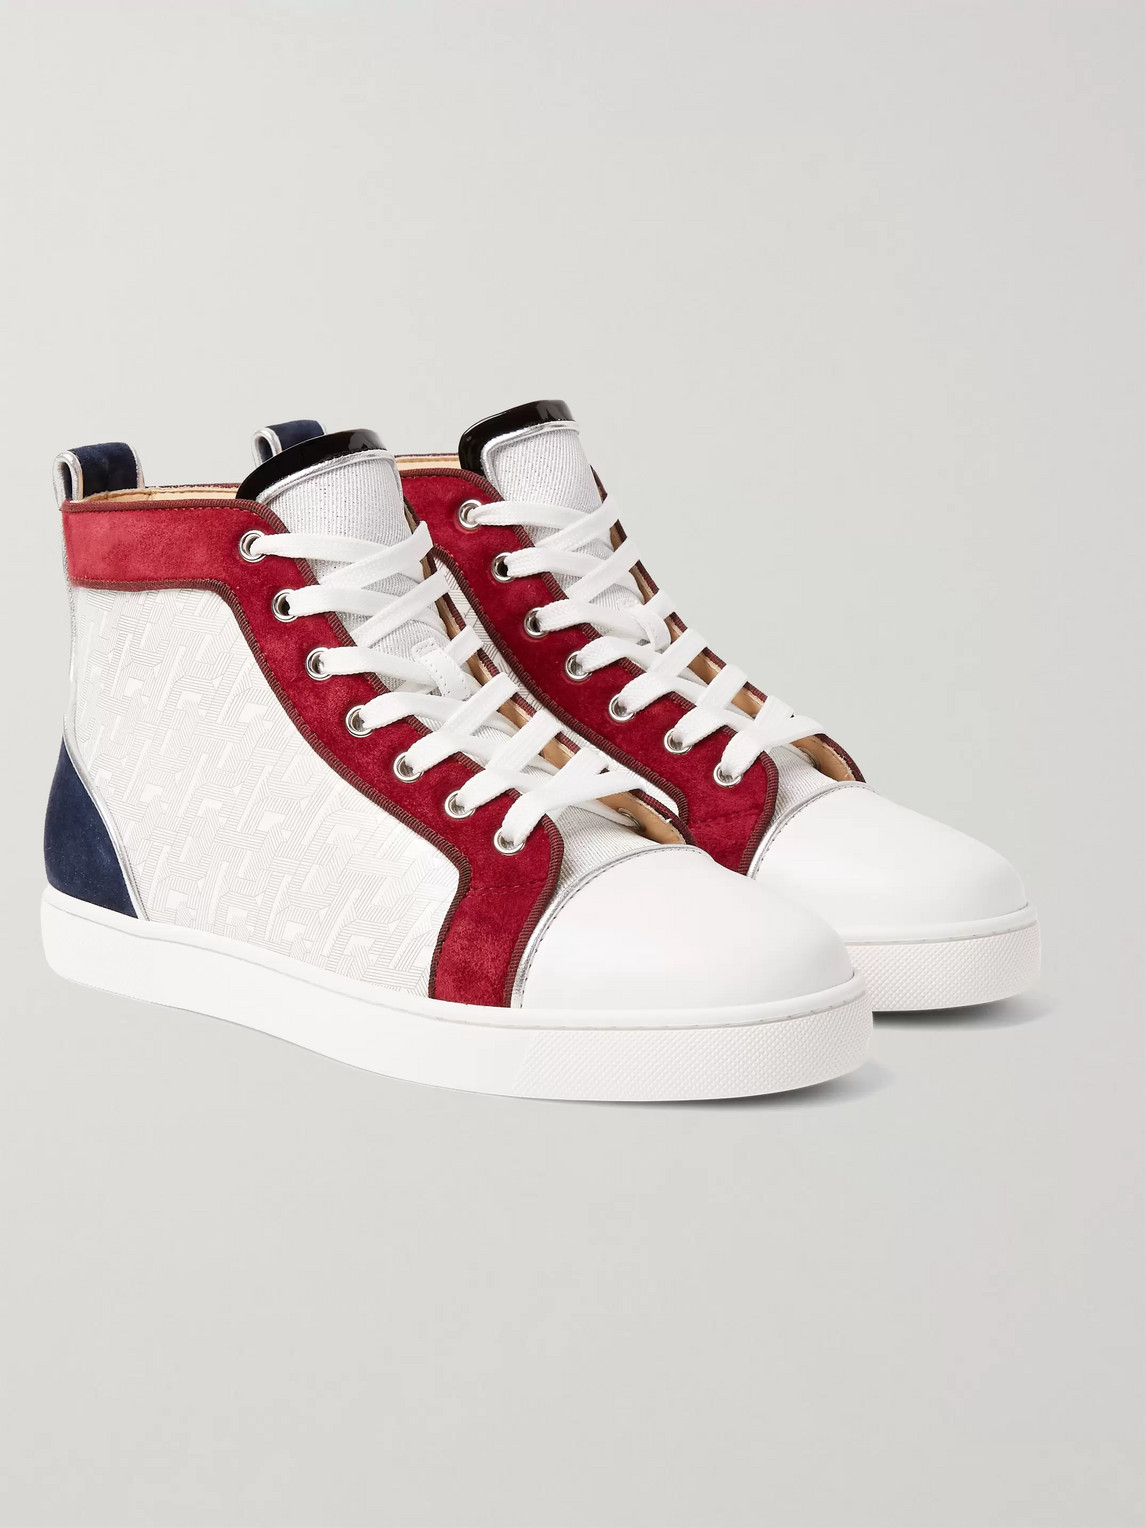 CHRISTIAN LOUBOUTIN LOUIS ORLATO SUEDE, LEATHER AND DENIM HIGH-TOP SNEAKERS